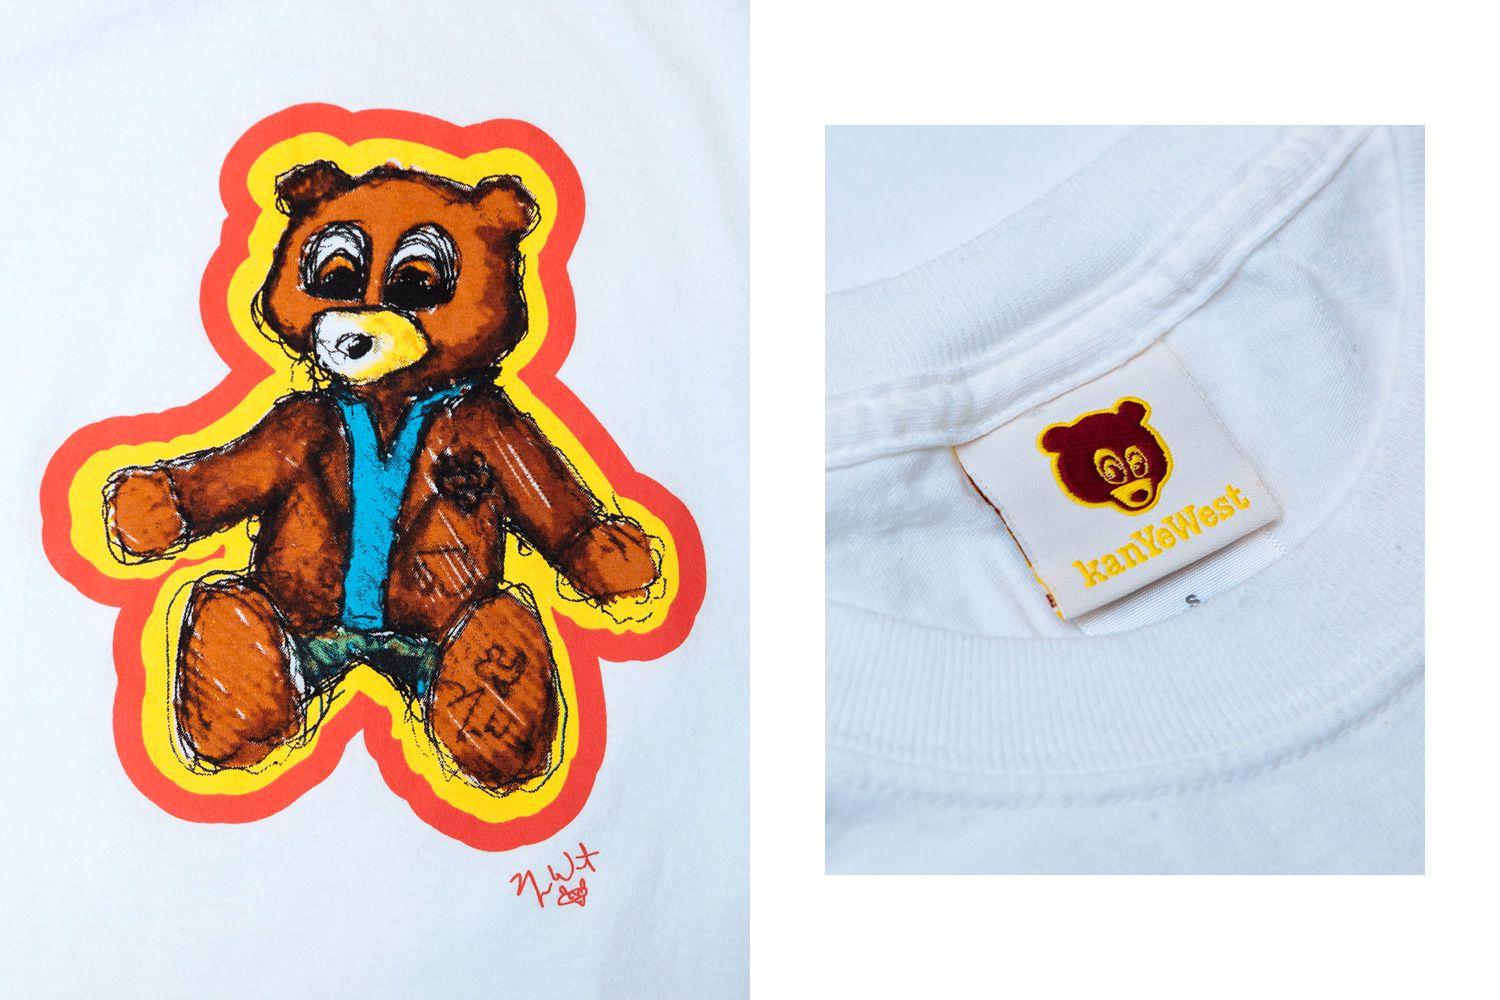 Yeezy Bear Logo - Check Out This Super Rare Kanye West Merchandise